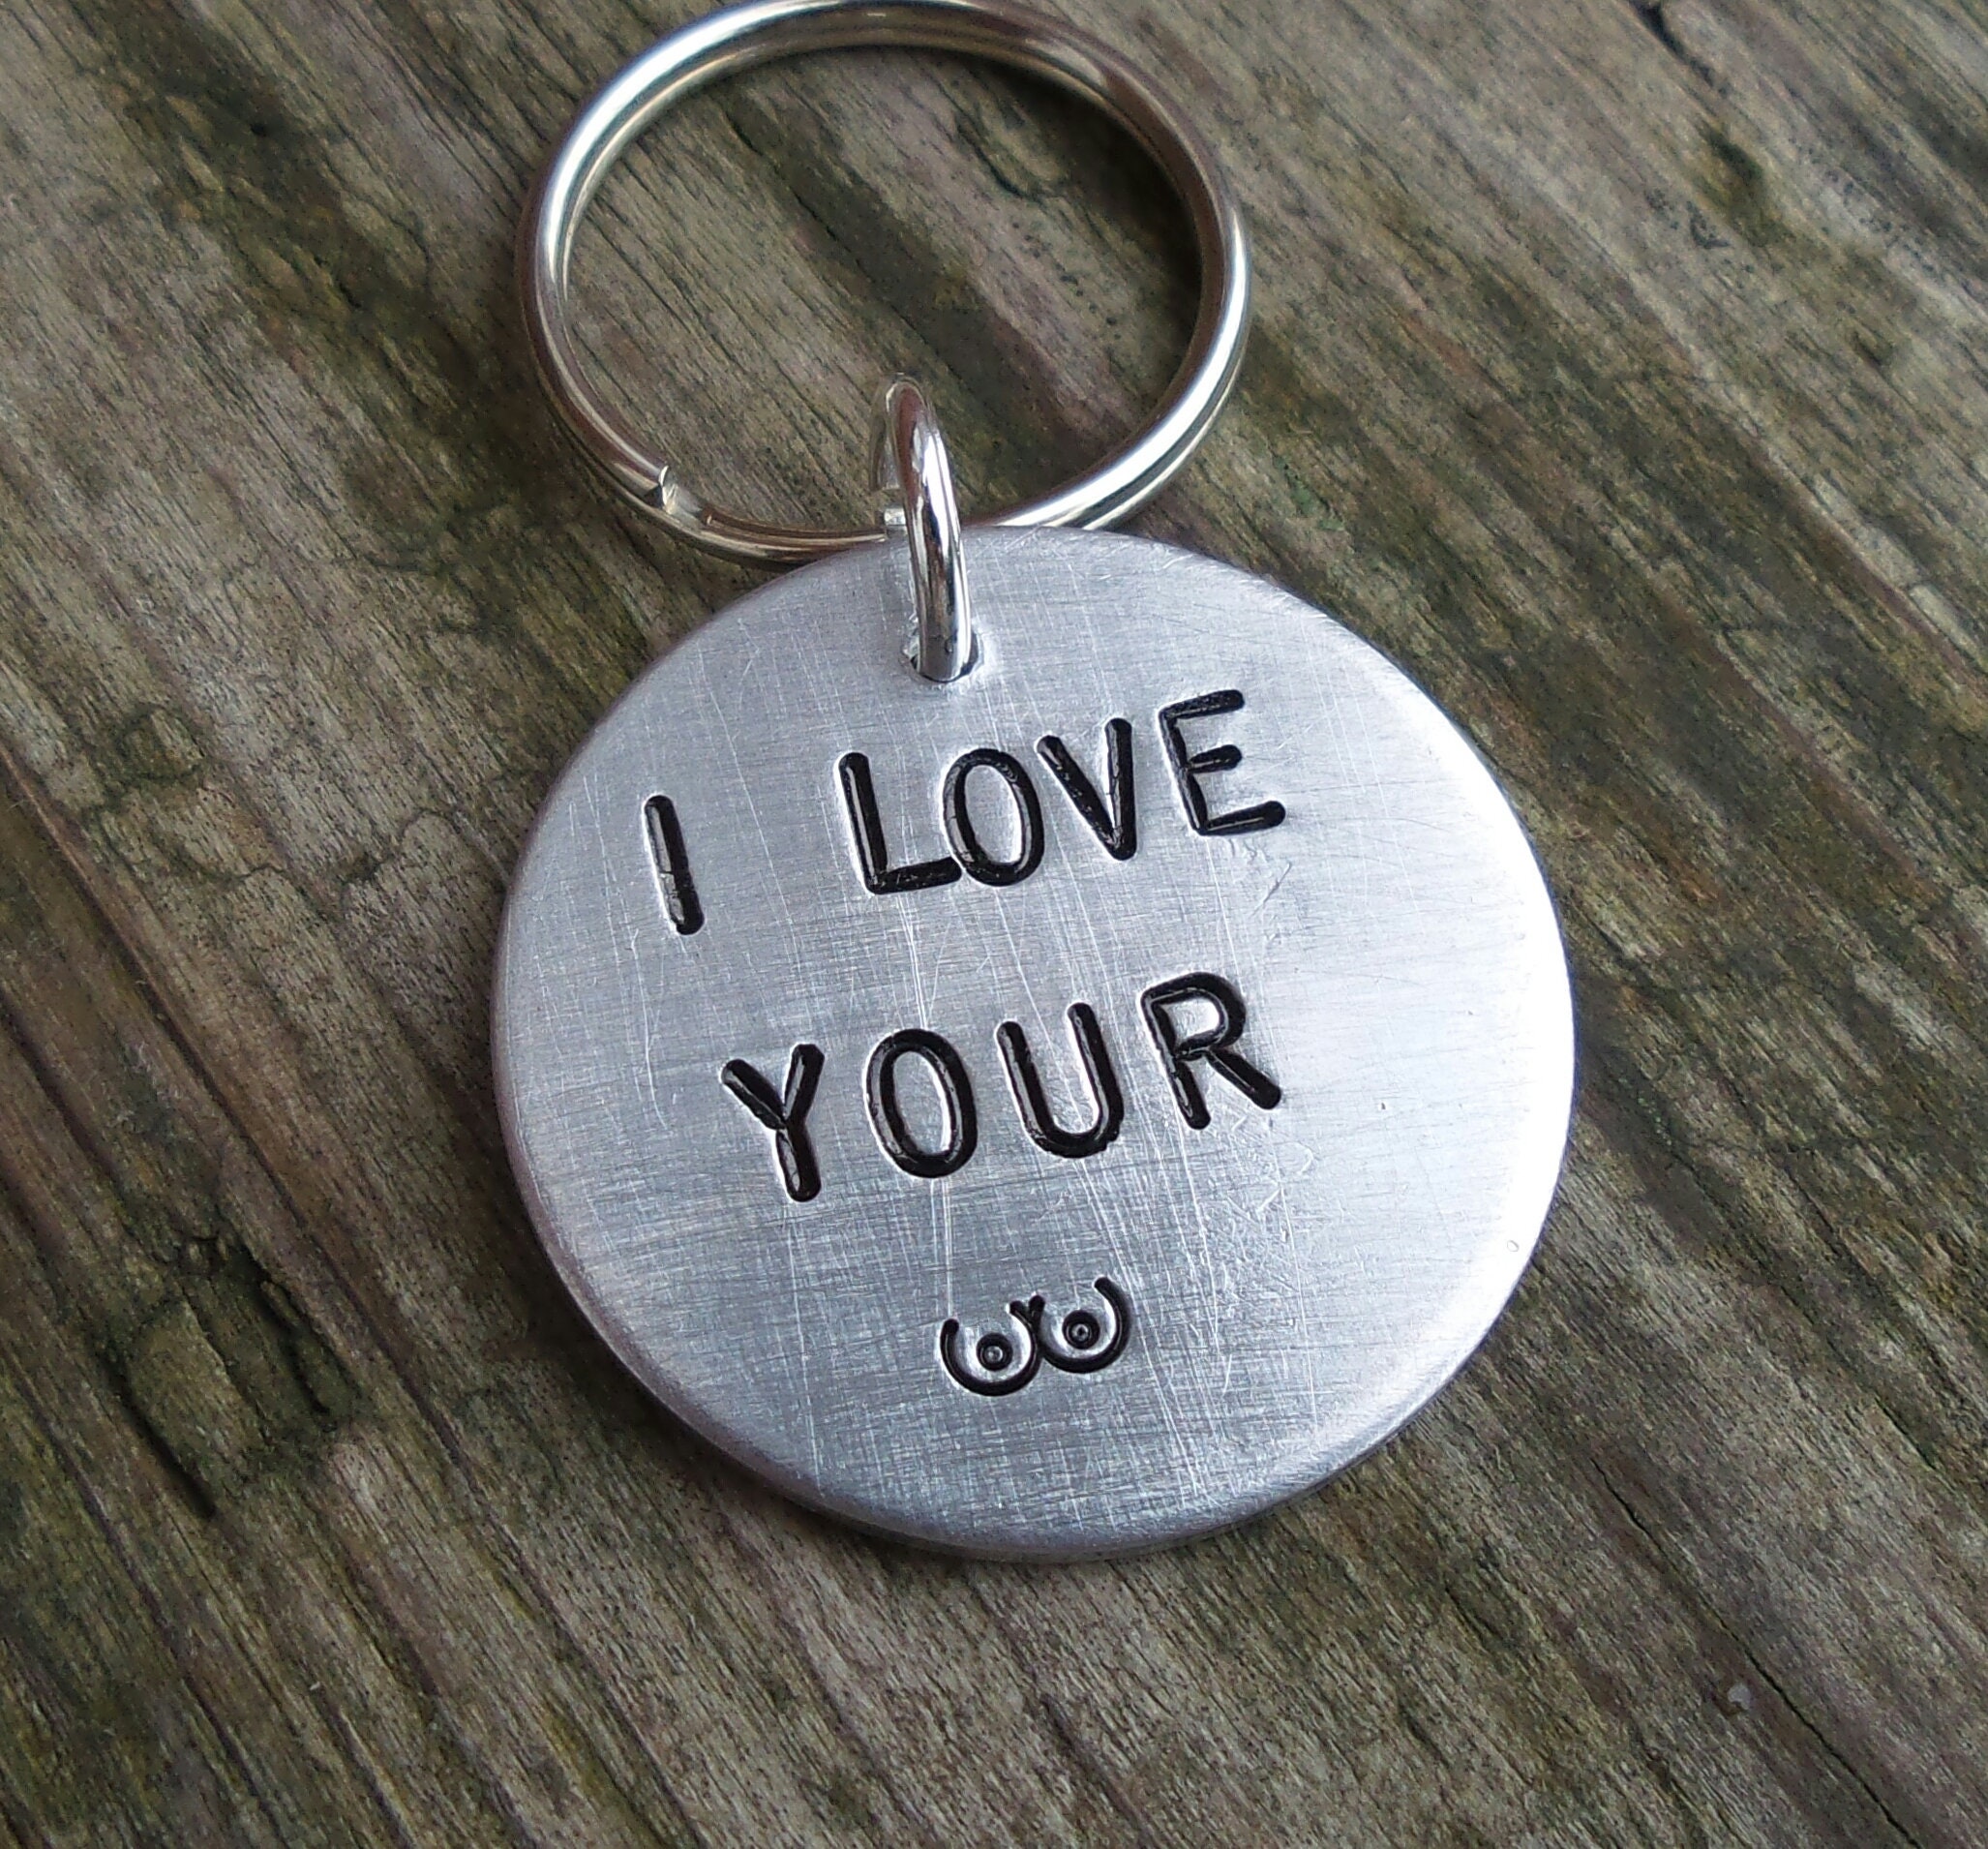 I Love Your BOOBS Funny Gifts For Her Key Ring BFF Offensive Rude Wife  Keychain Girlriend KEYRING Anniversary Bff Rude Offensive Joke Lol